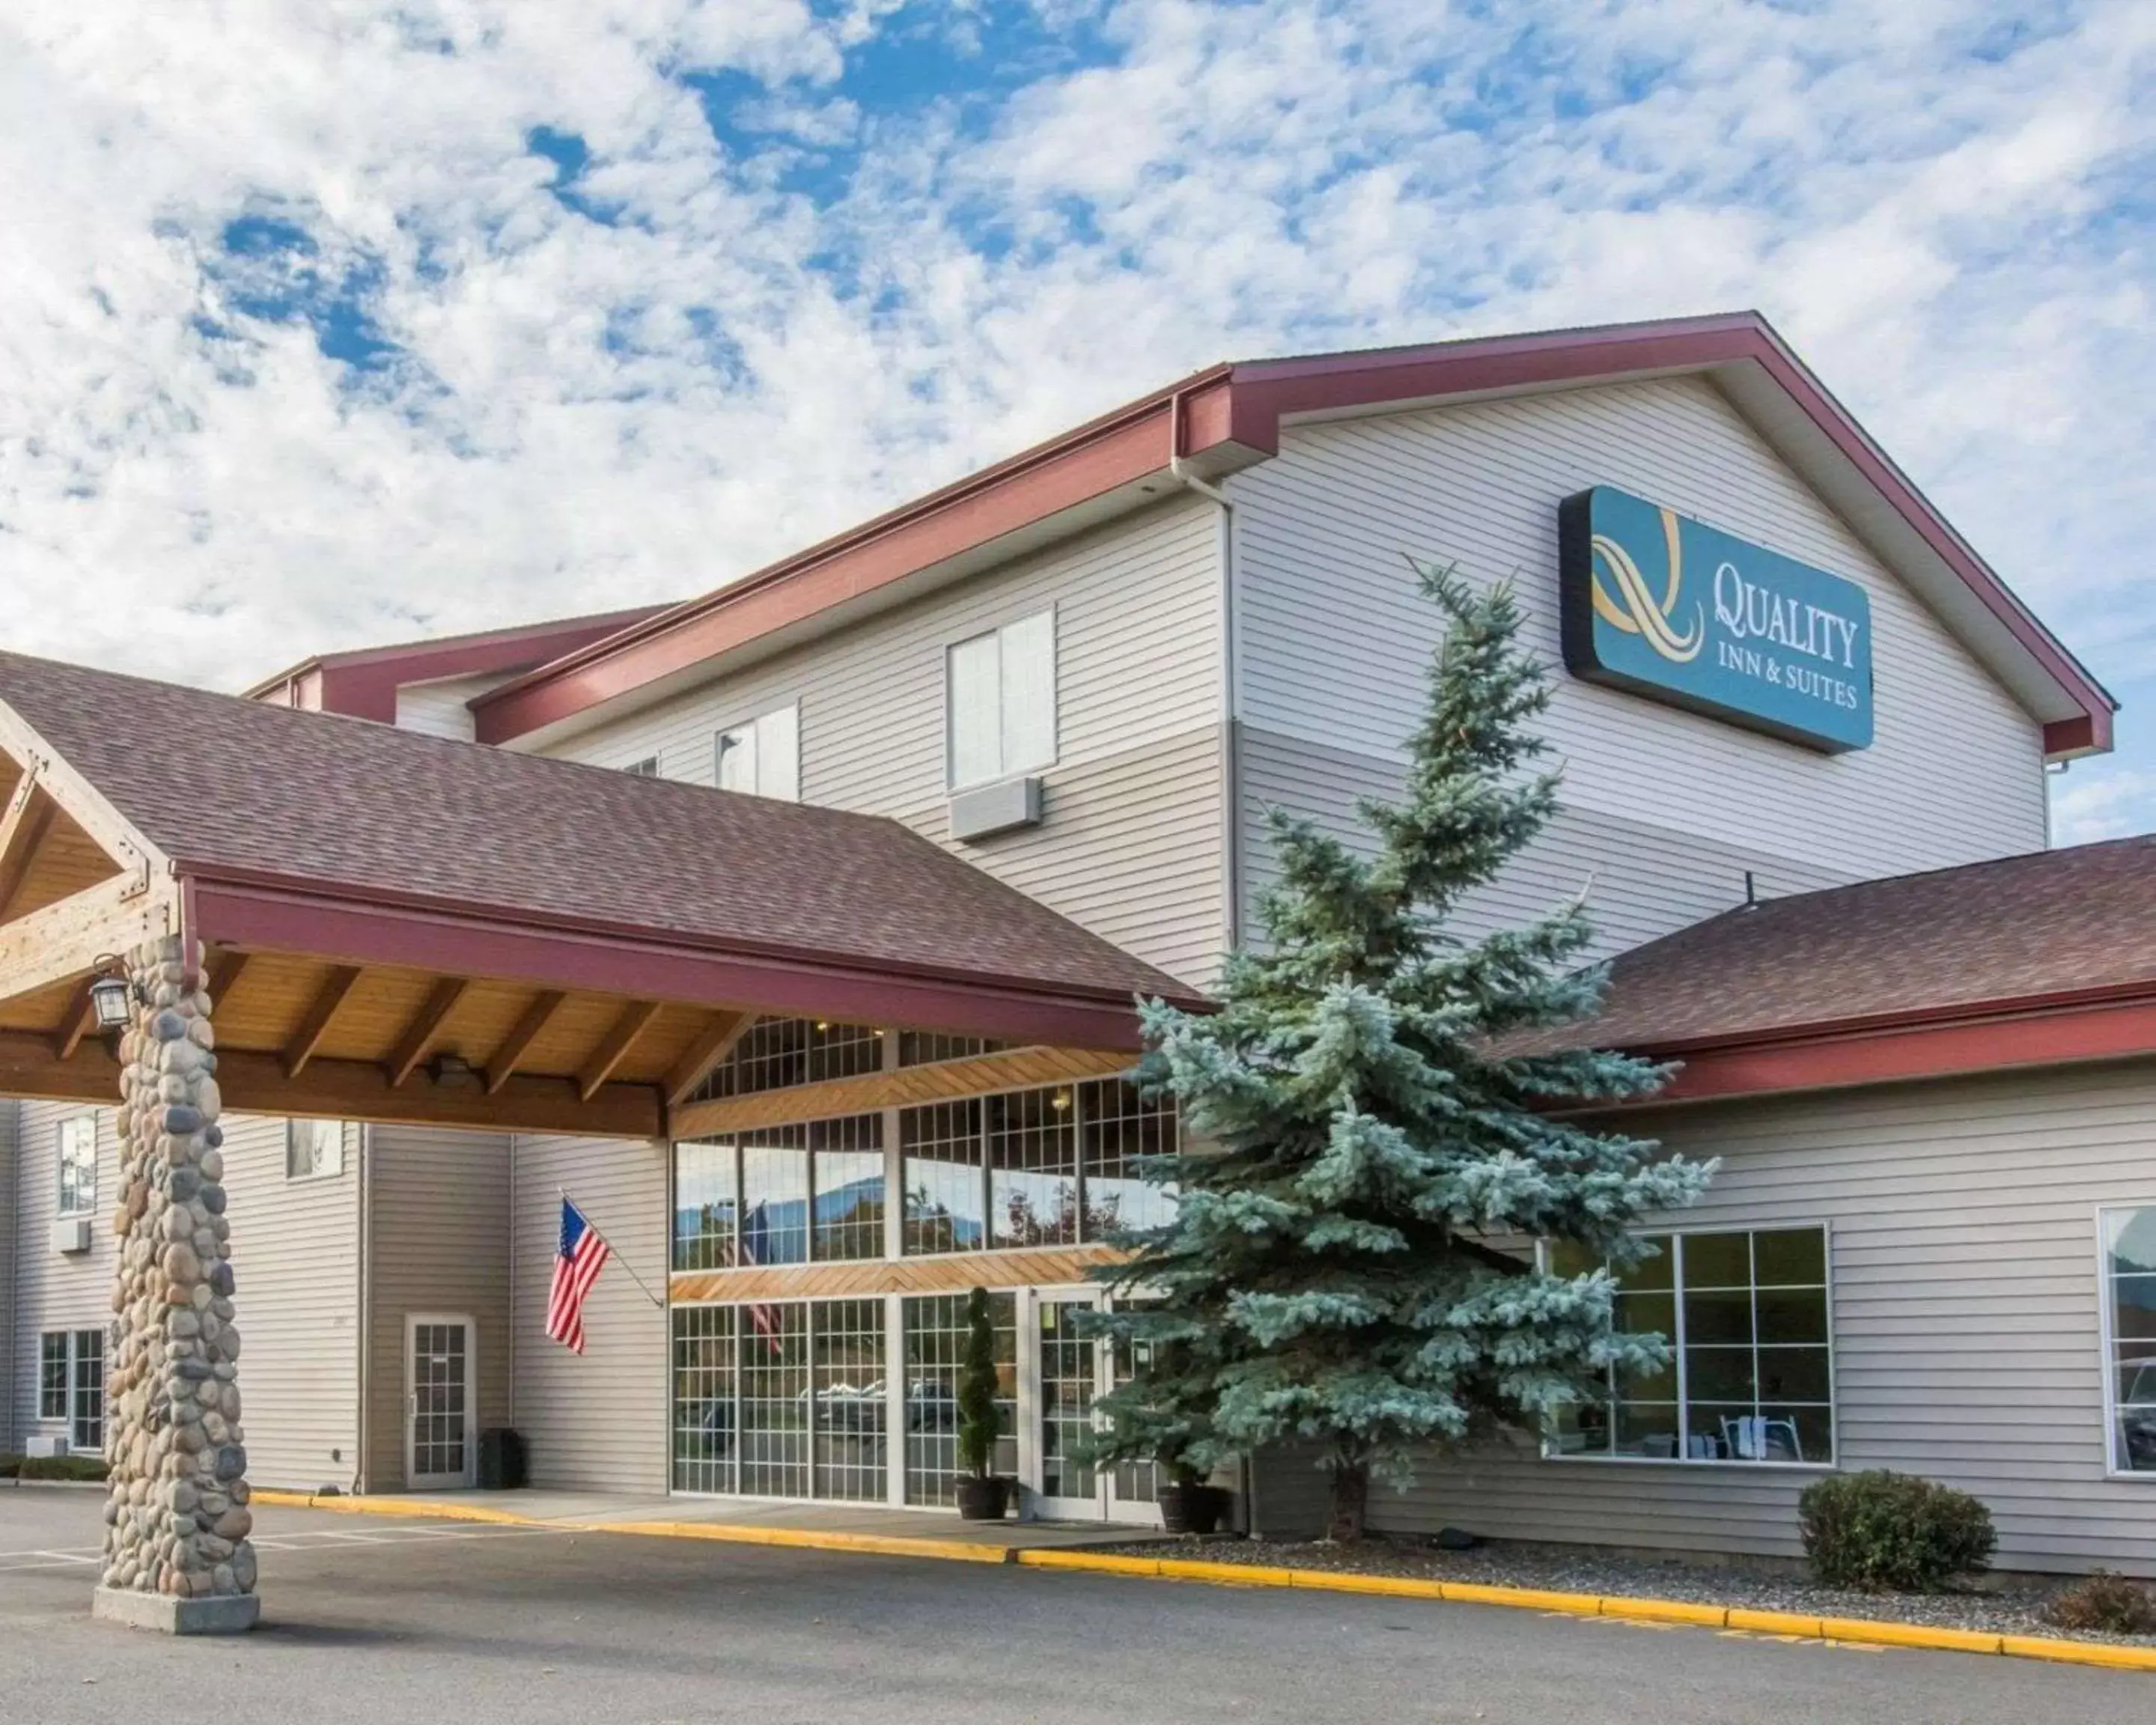 Property Building in Quality Inn & Suites of Liberty Lake